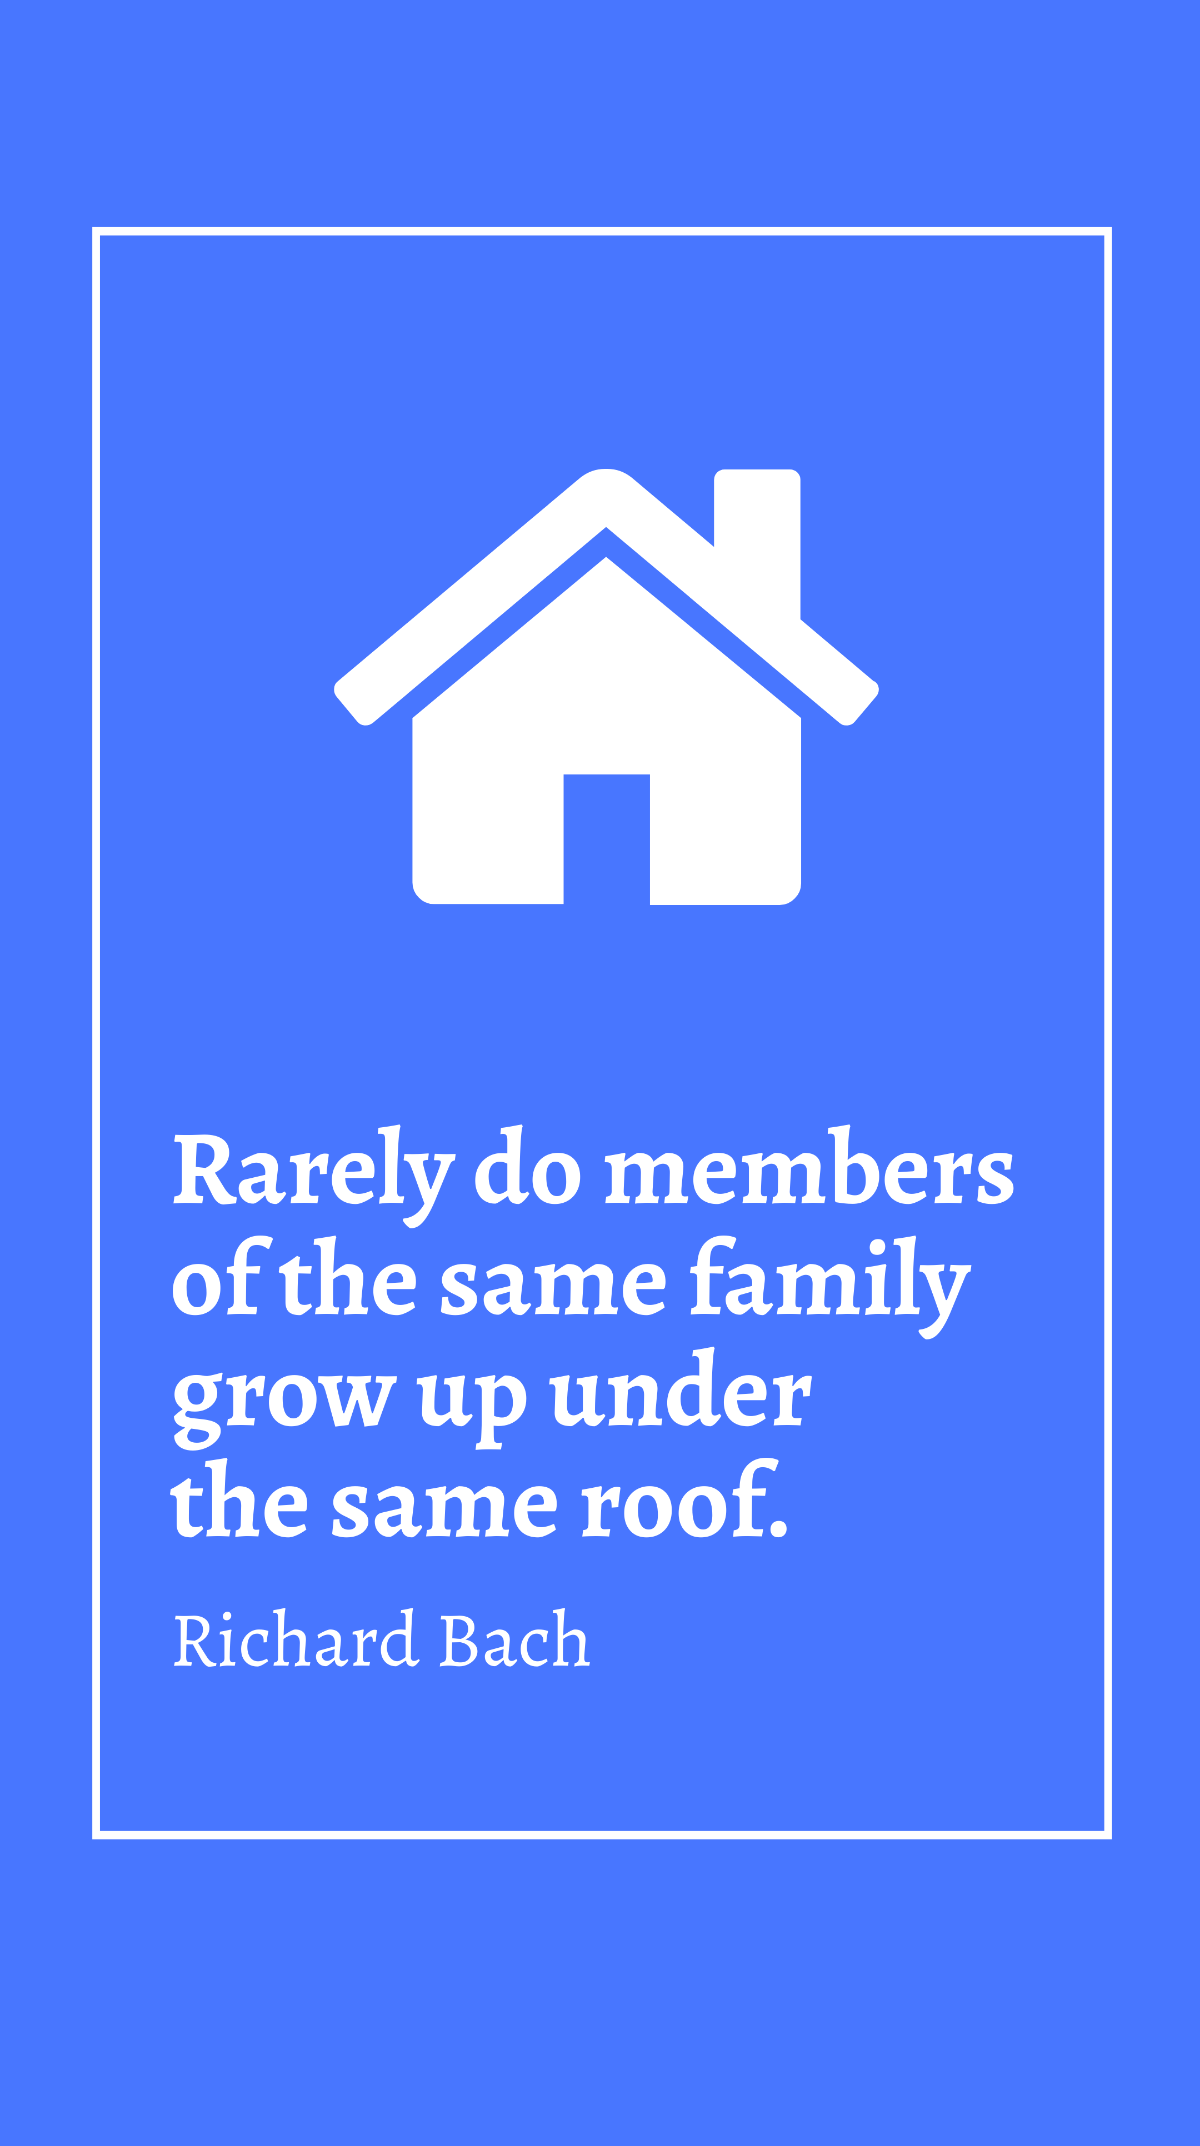 Richard Bach - Rarely do members of the same family grow up under the same roof.